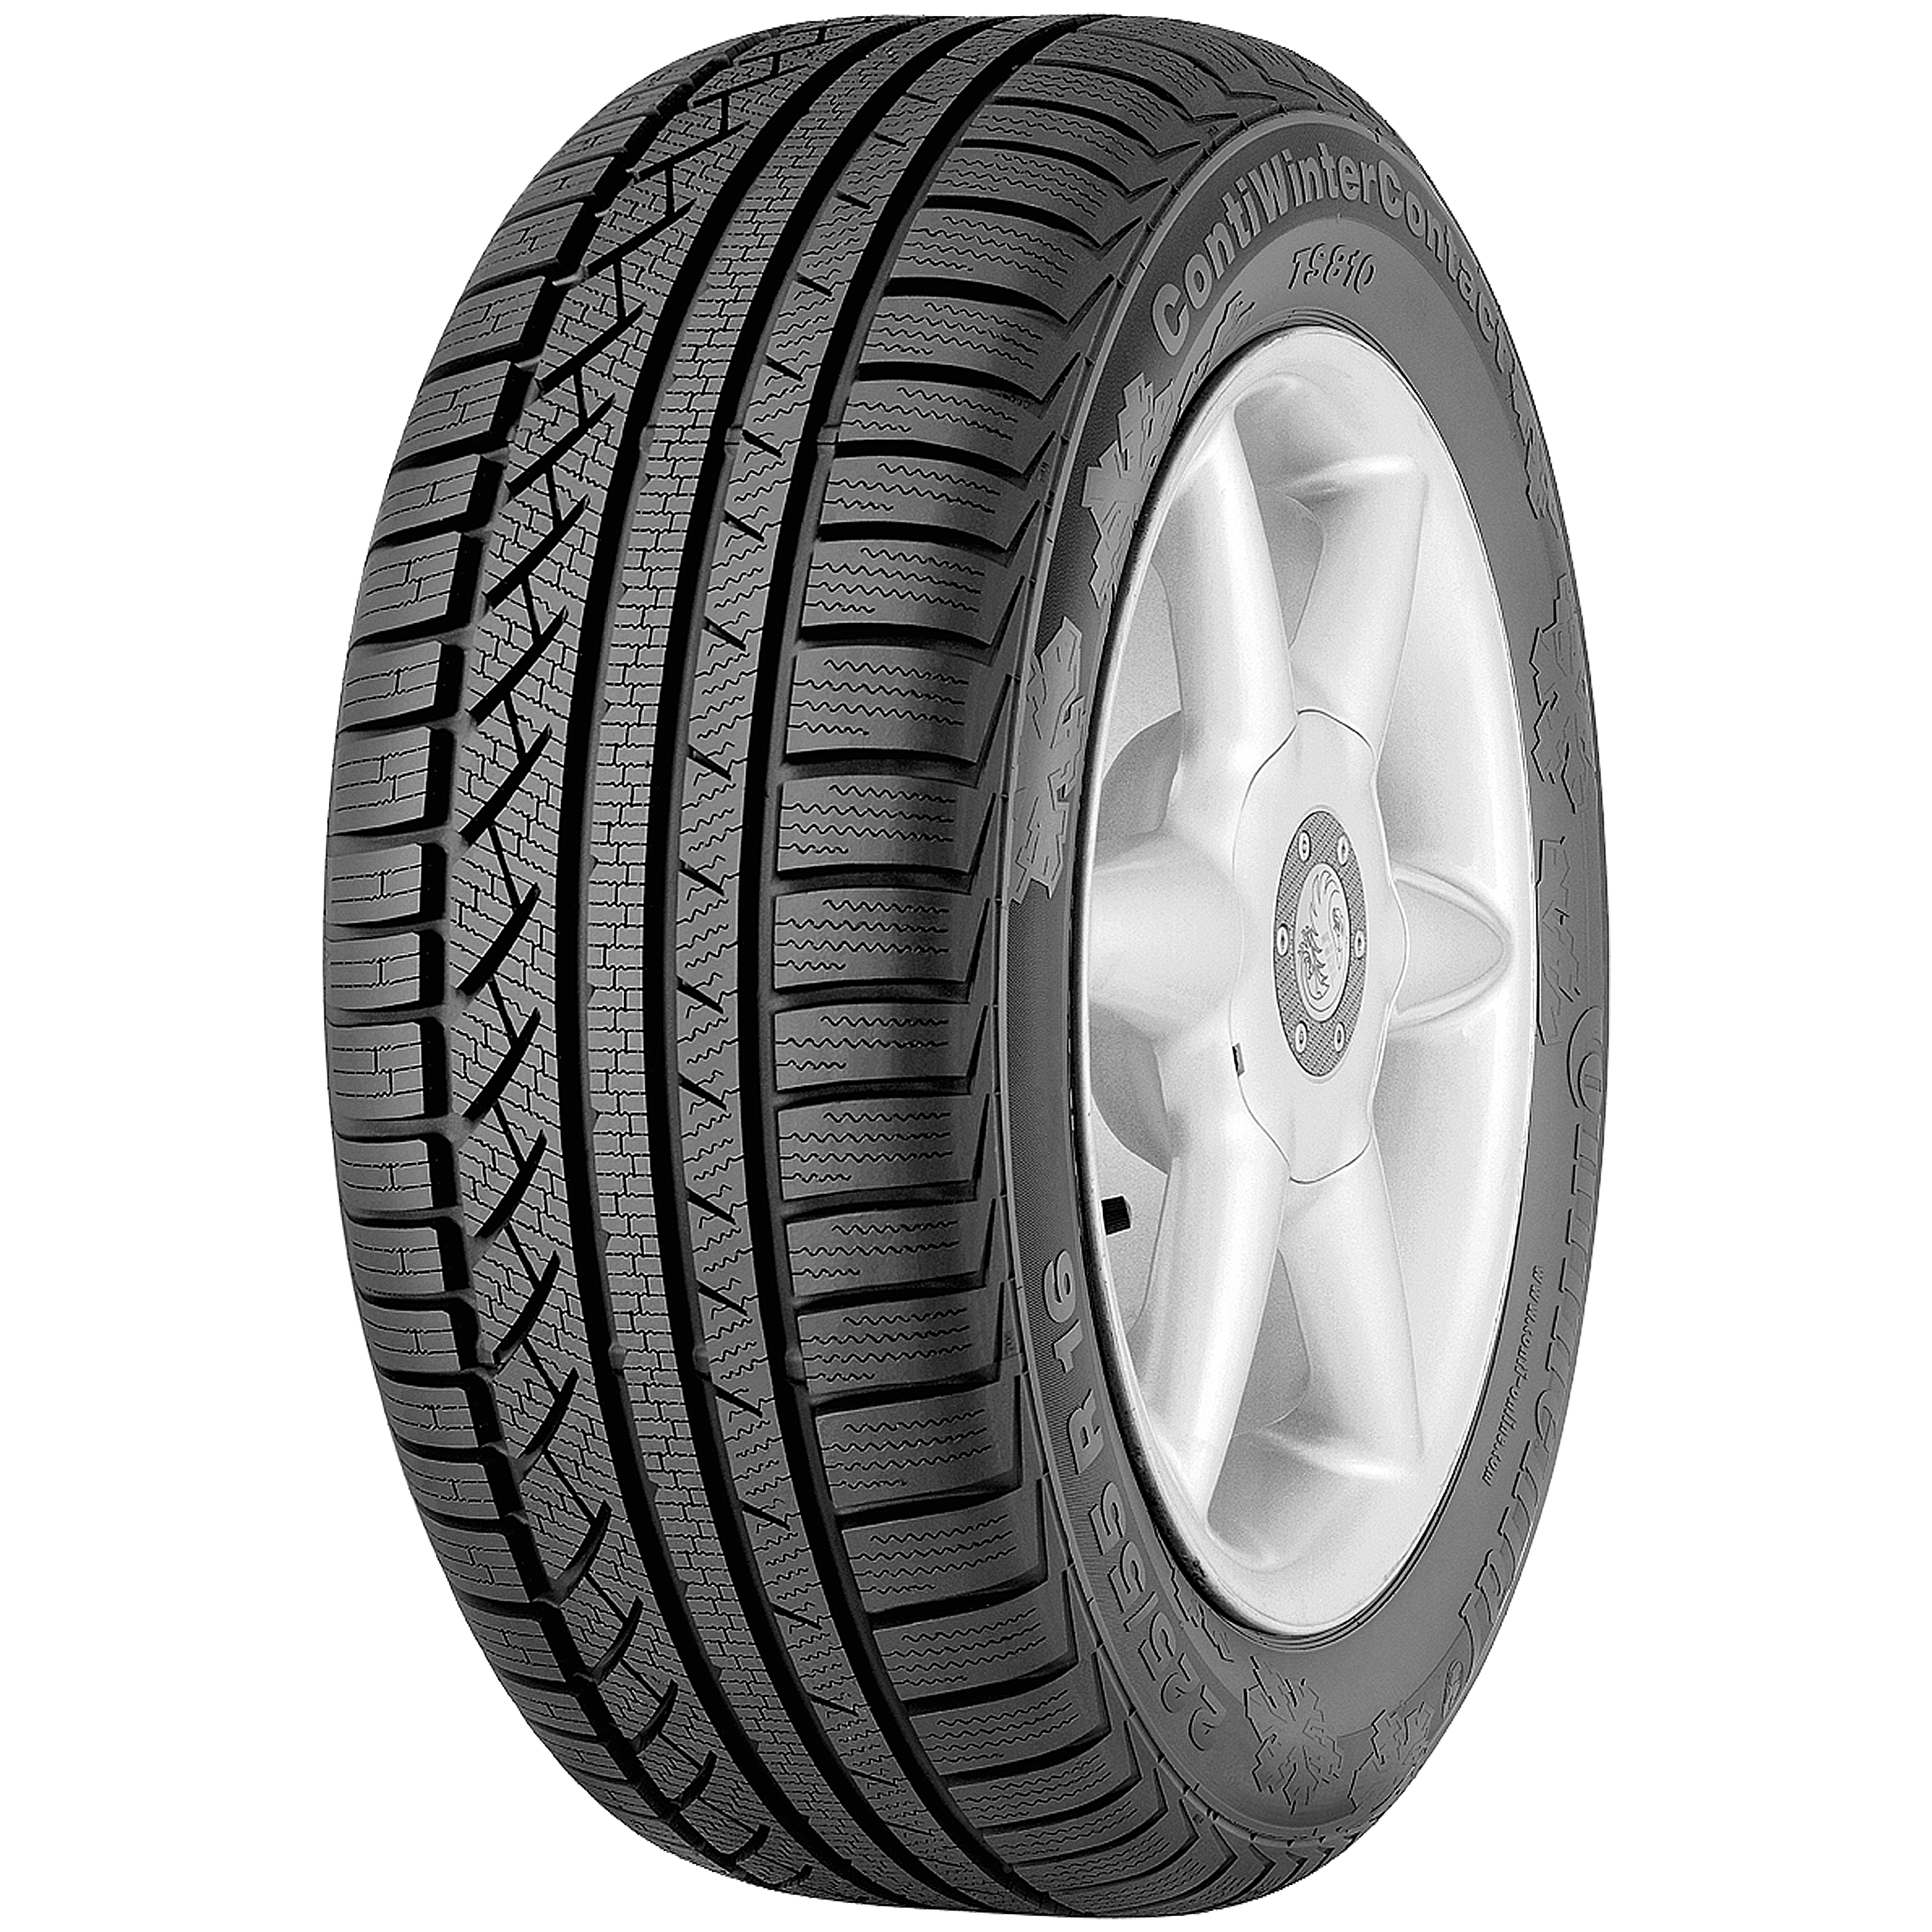 medium for winter luxury-class The 810: TS tire ContiWinterContact comfortable and cars